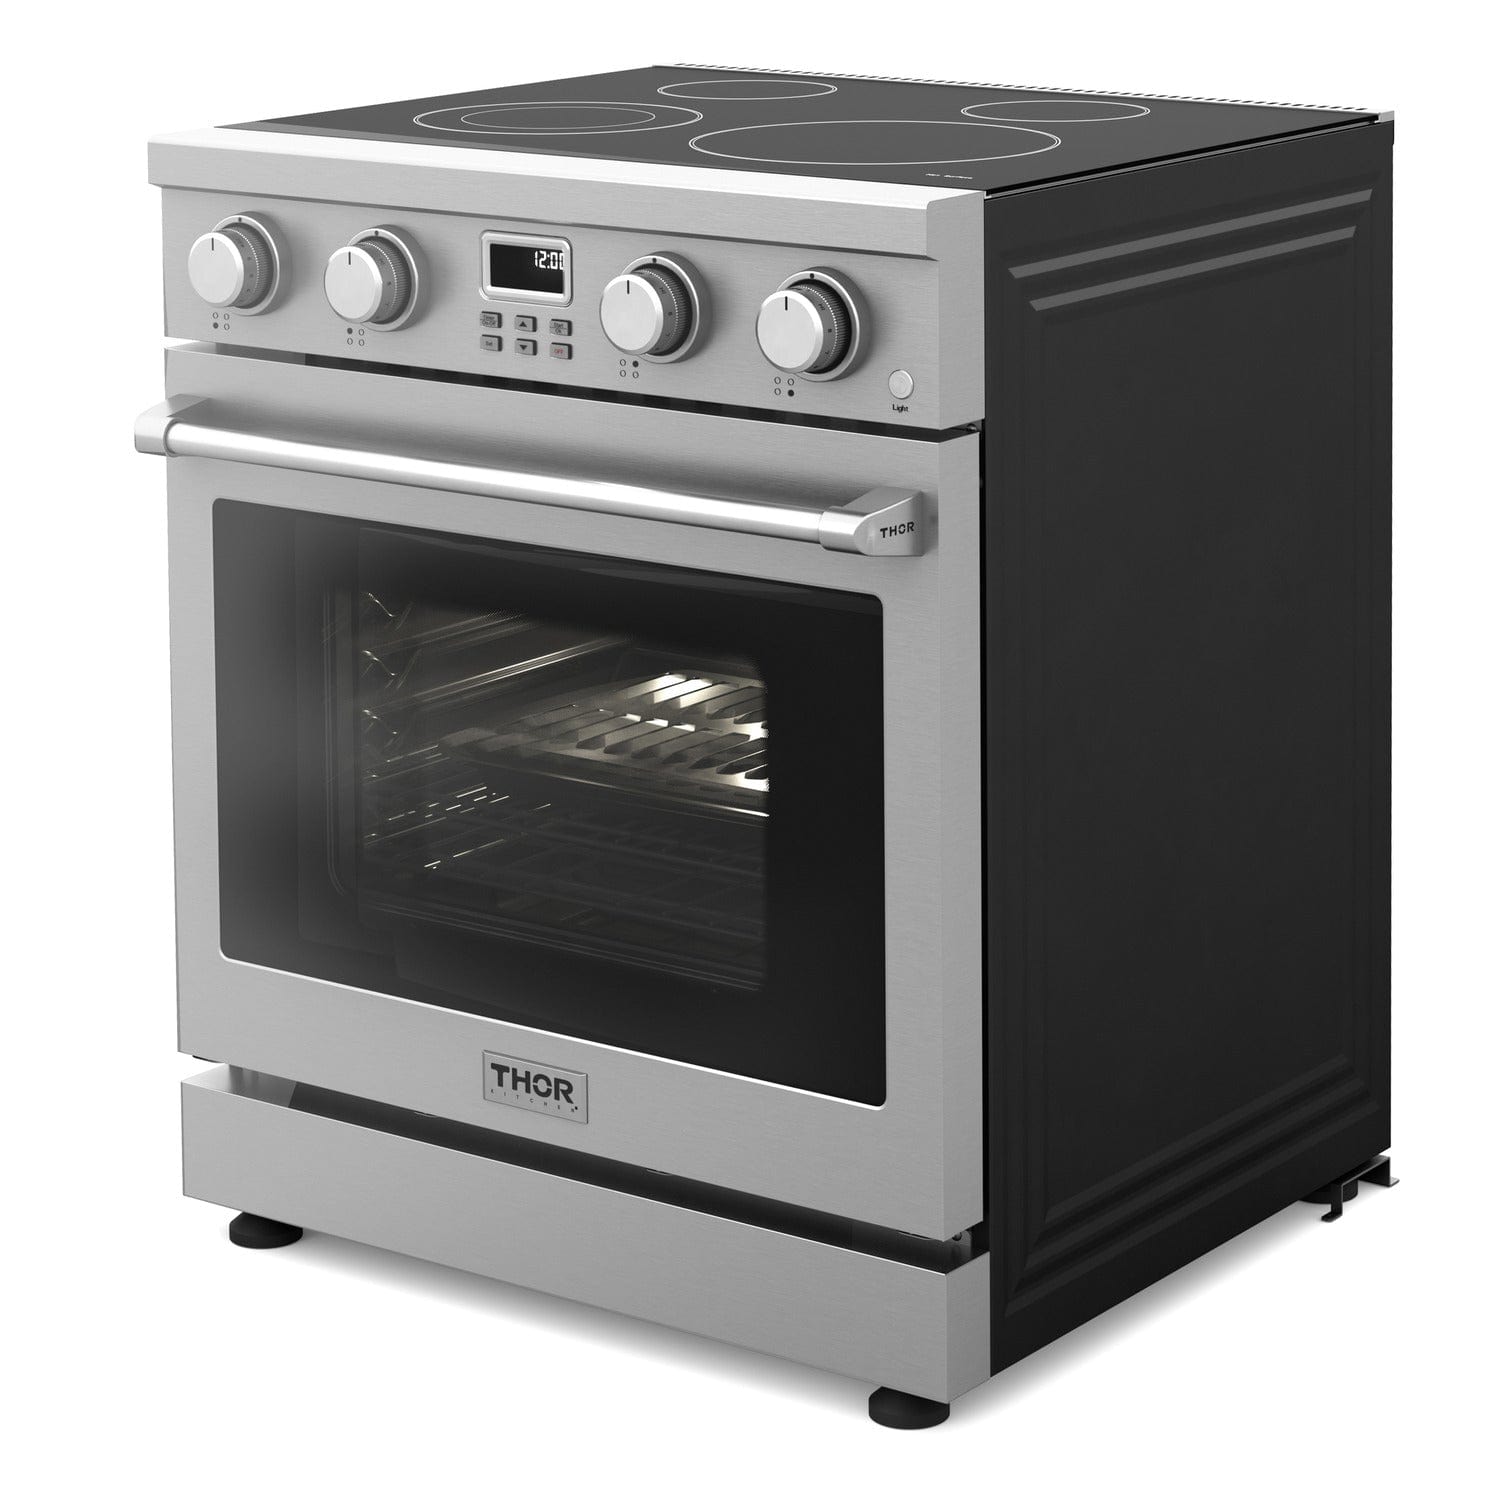 Thor Kitchen 30" Contemporary Professional Electric Range ARE30 Ranges ARE30 Luxury Appliances Direct